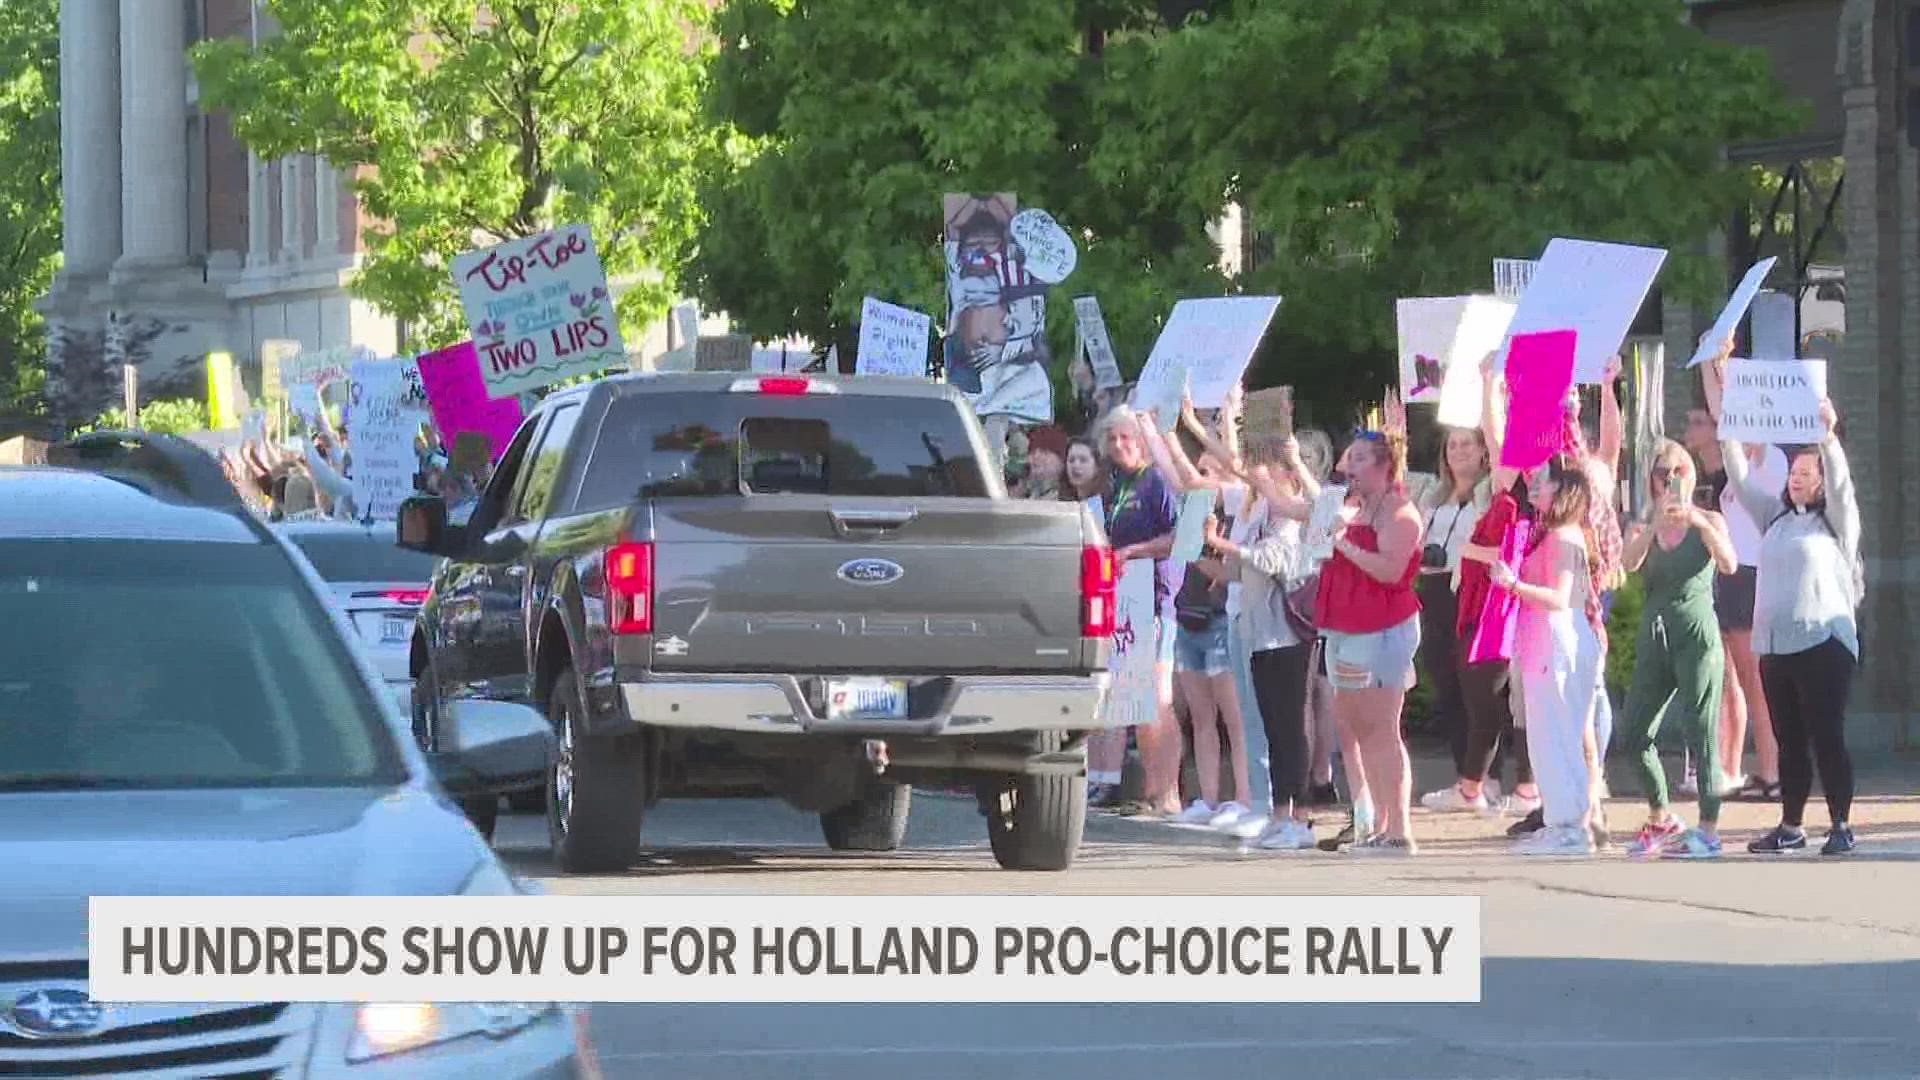 In Ottawa County on Monday night, there was a large protest against the U.S. Supreme Court's decision on Friday to overturn Roe V. Wade.